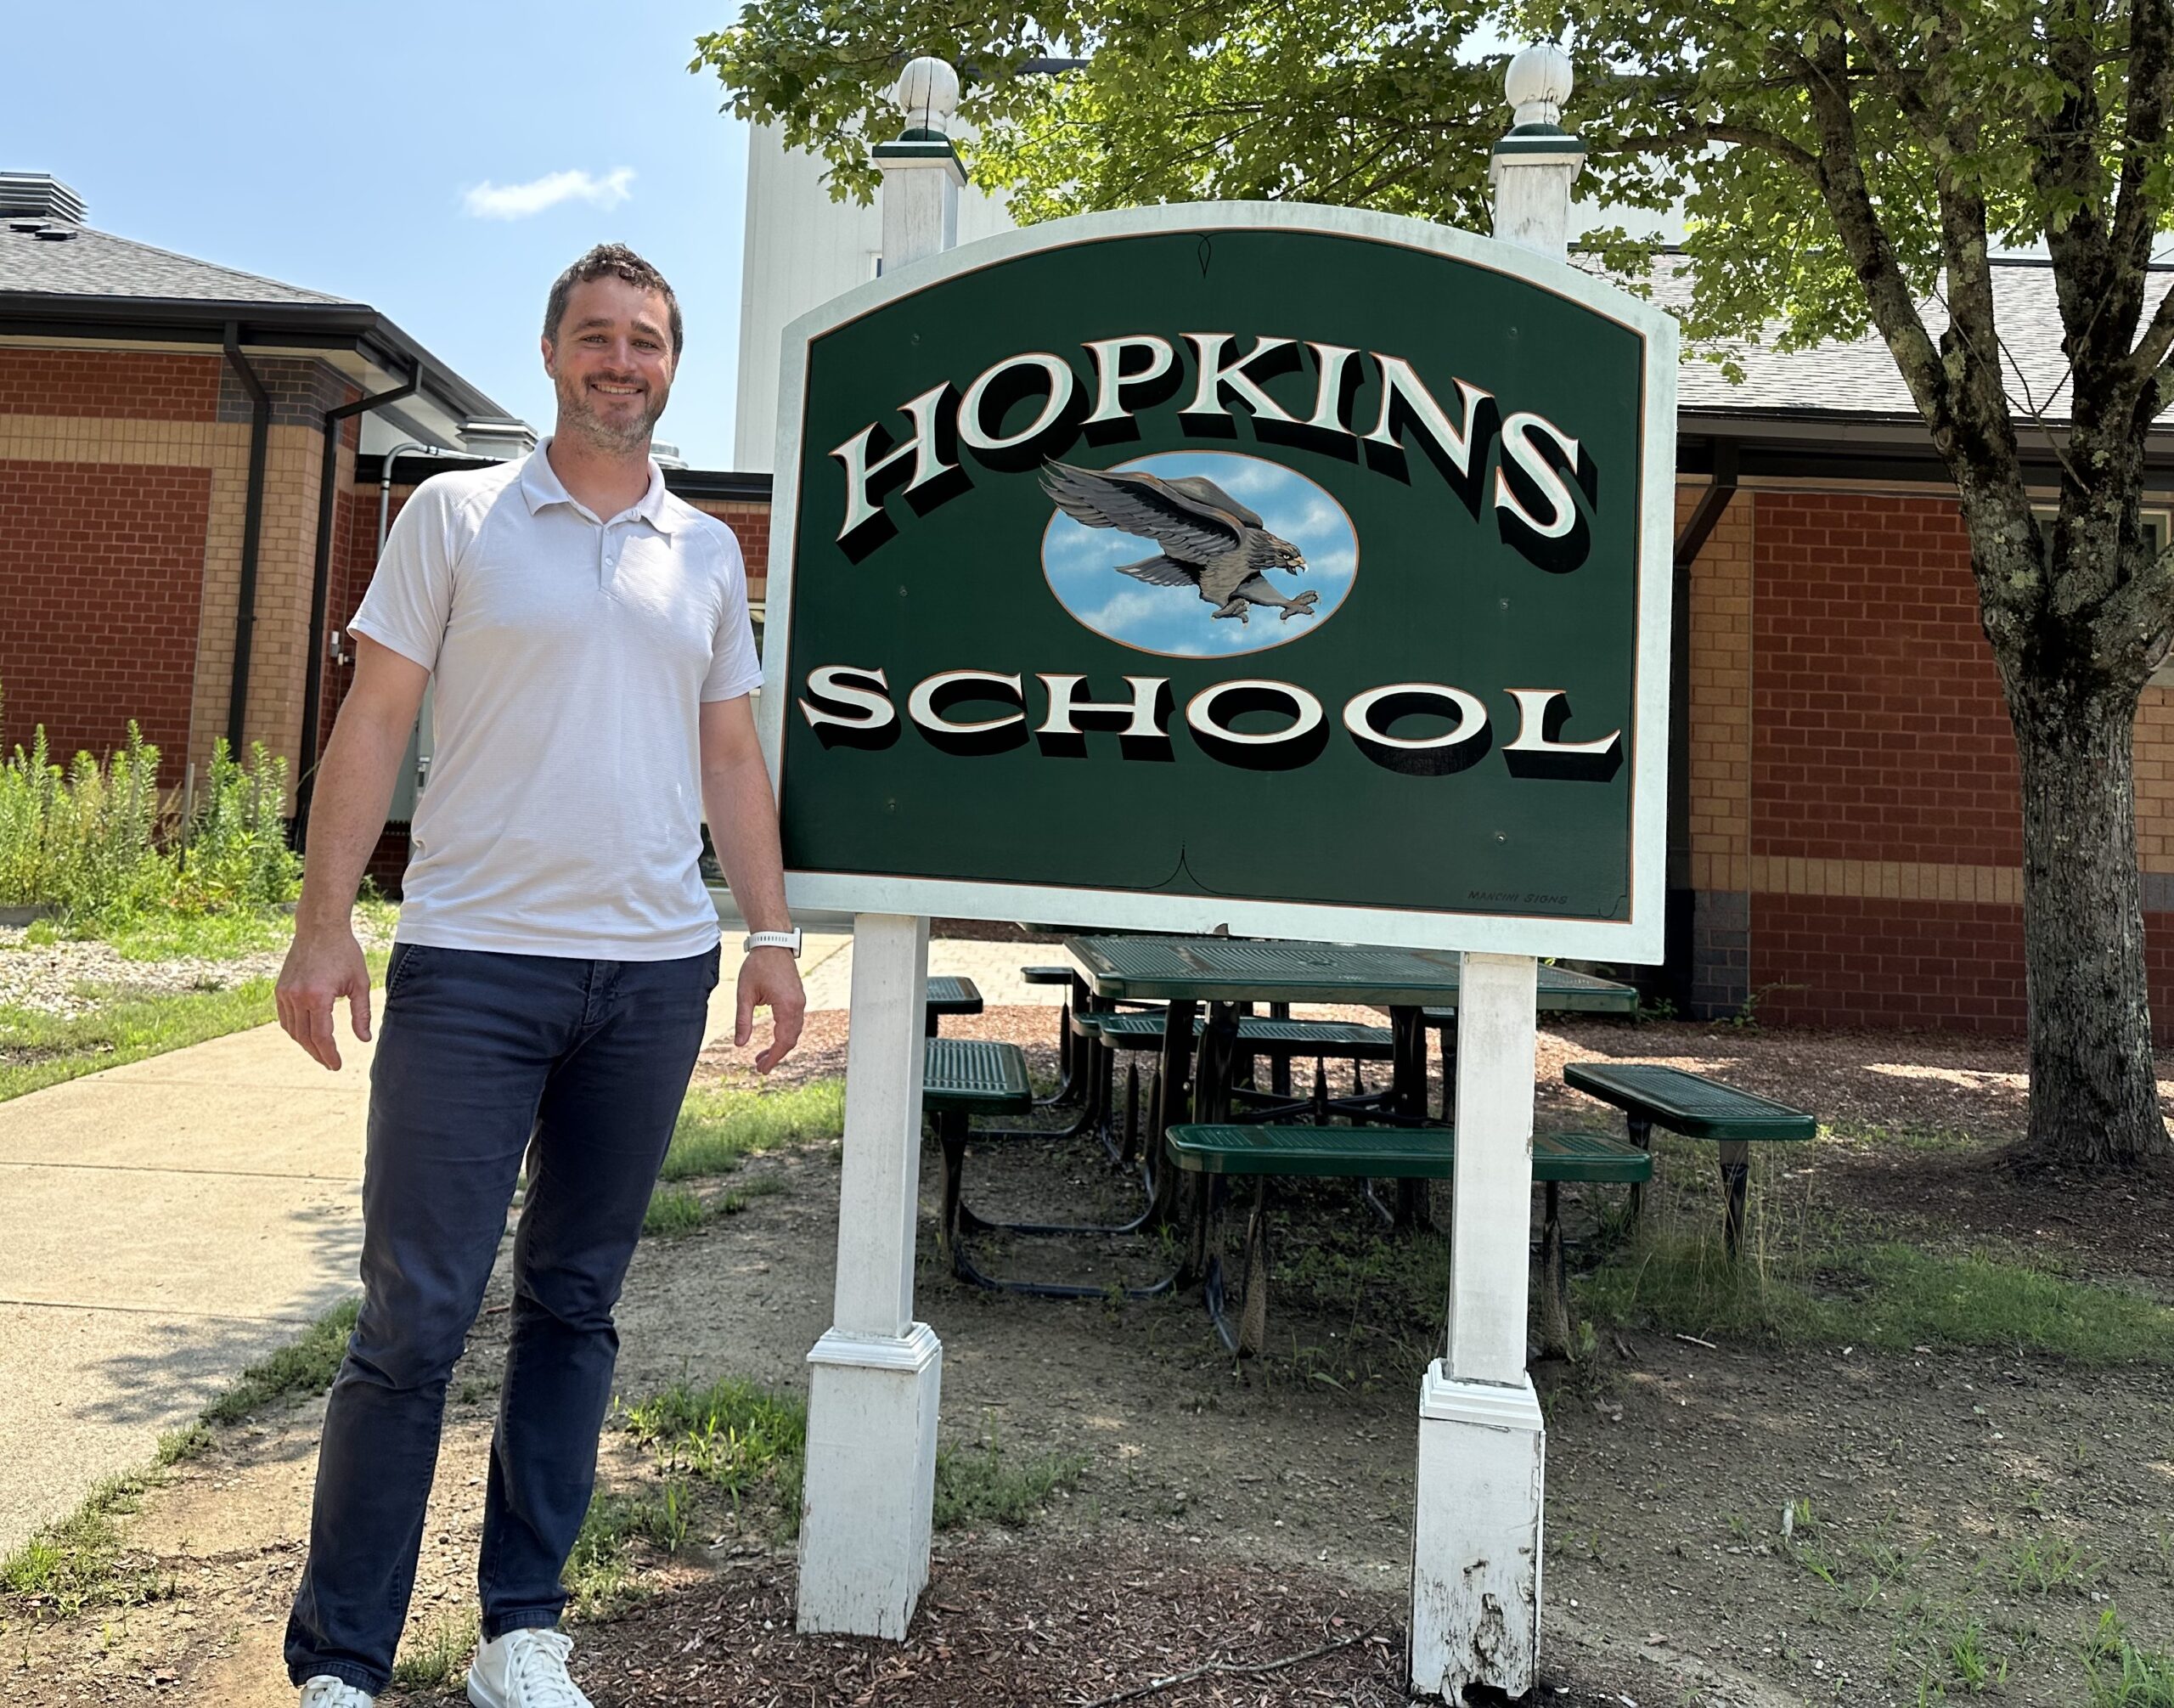 Cotter takes over as principal at Hopkins School